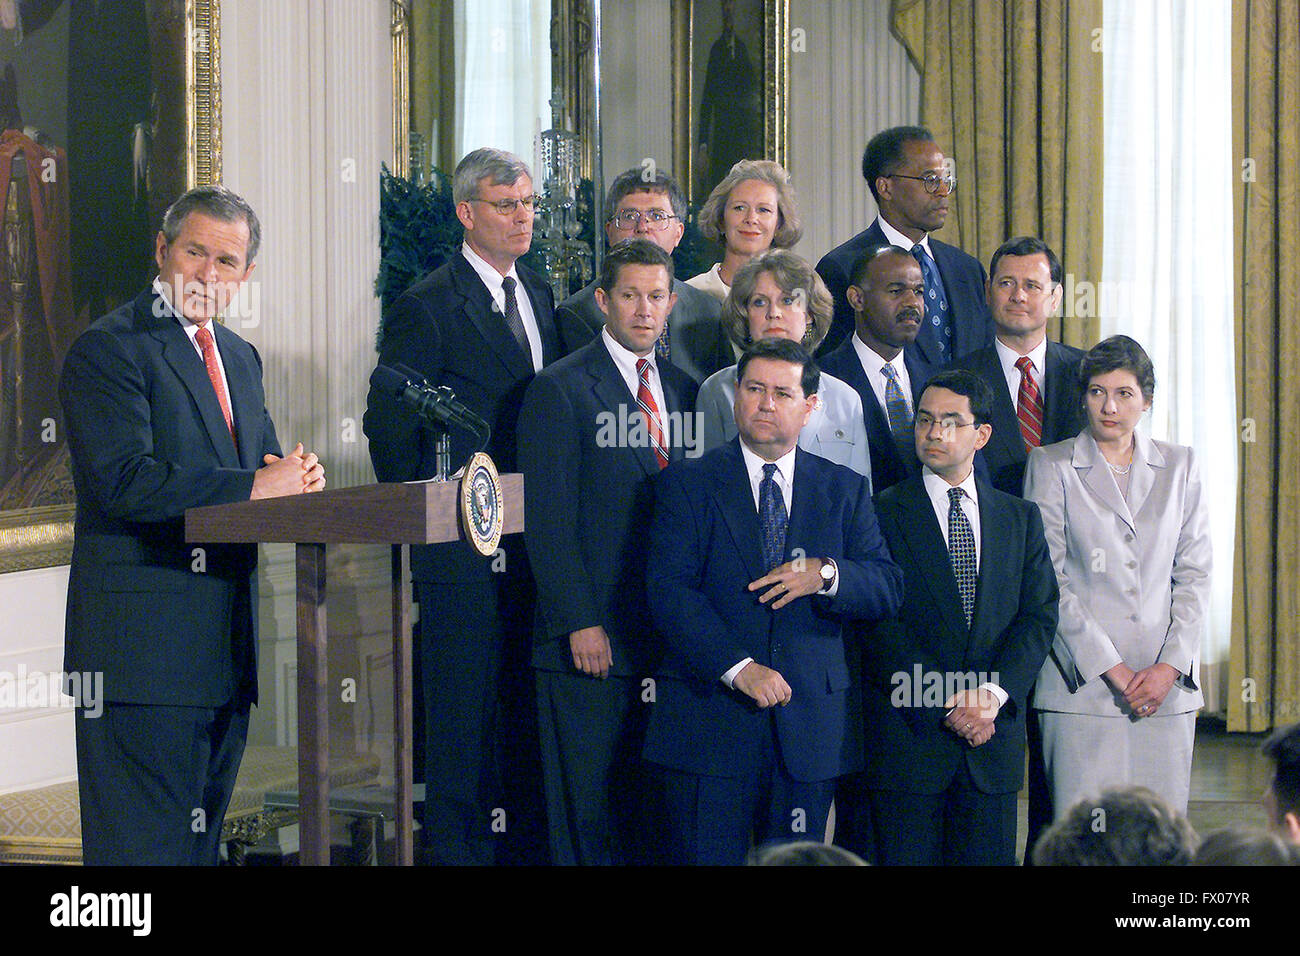 Washington, District of Columbia, USA. 9th May, 2001. United States President George W. Bush with 11 of his first nominees for Federal judiciary nominations in an event in the East Room of the White House, May 9, 2001. The judges, left to right, Front row, Judge Dennis Shedd, Migues Estrada and Judge Priscilla Owens; Second row, Jeffrey Sutton, Judge Edith Brown Clement, Judge Roger Gregory and John Roberts; Back row, Judge Terrence Boyle, Michael McConnell, Judge Deborah Cook and Judge Barrington Parker.Credit: CNP © CNP/ZUMA Wire/Alamy Live News Stock Photo